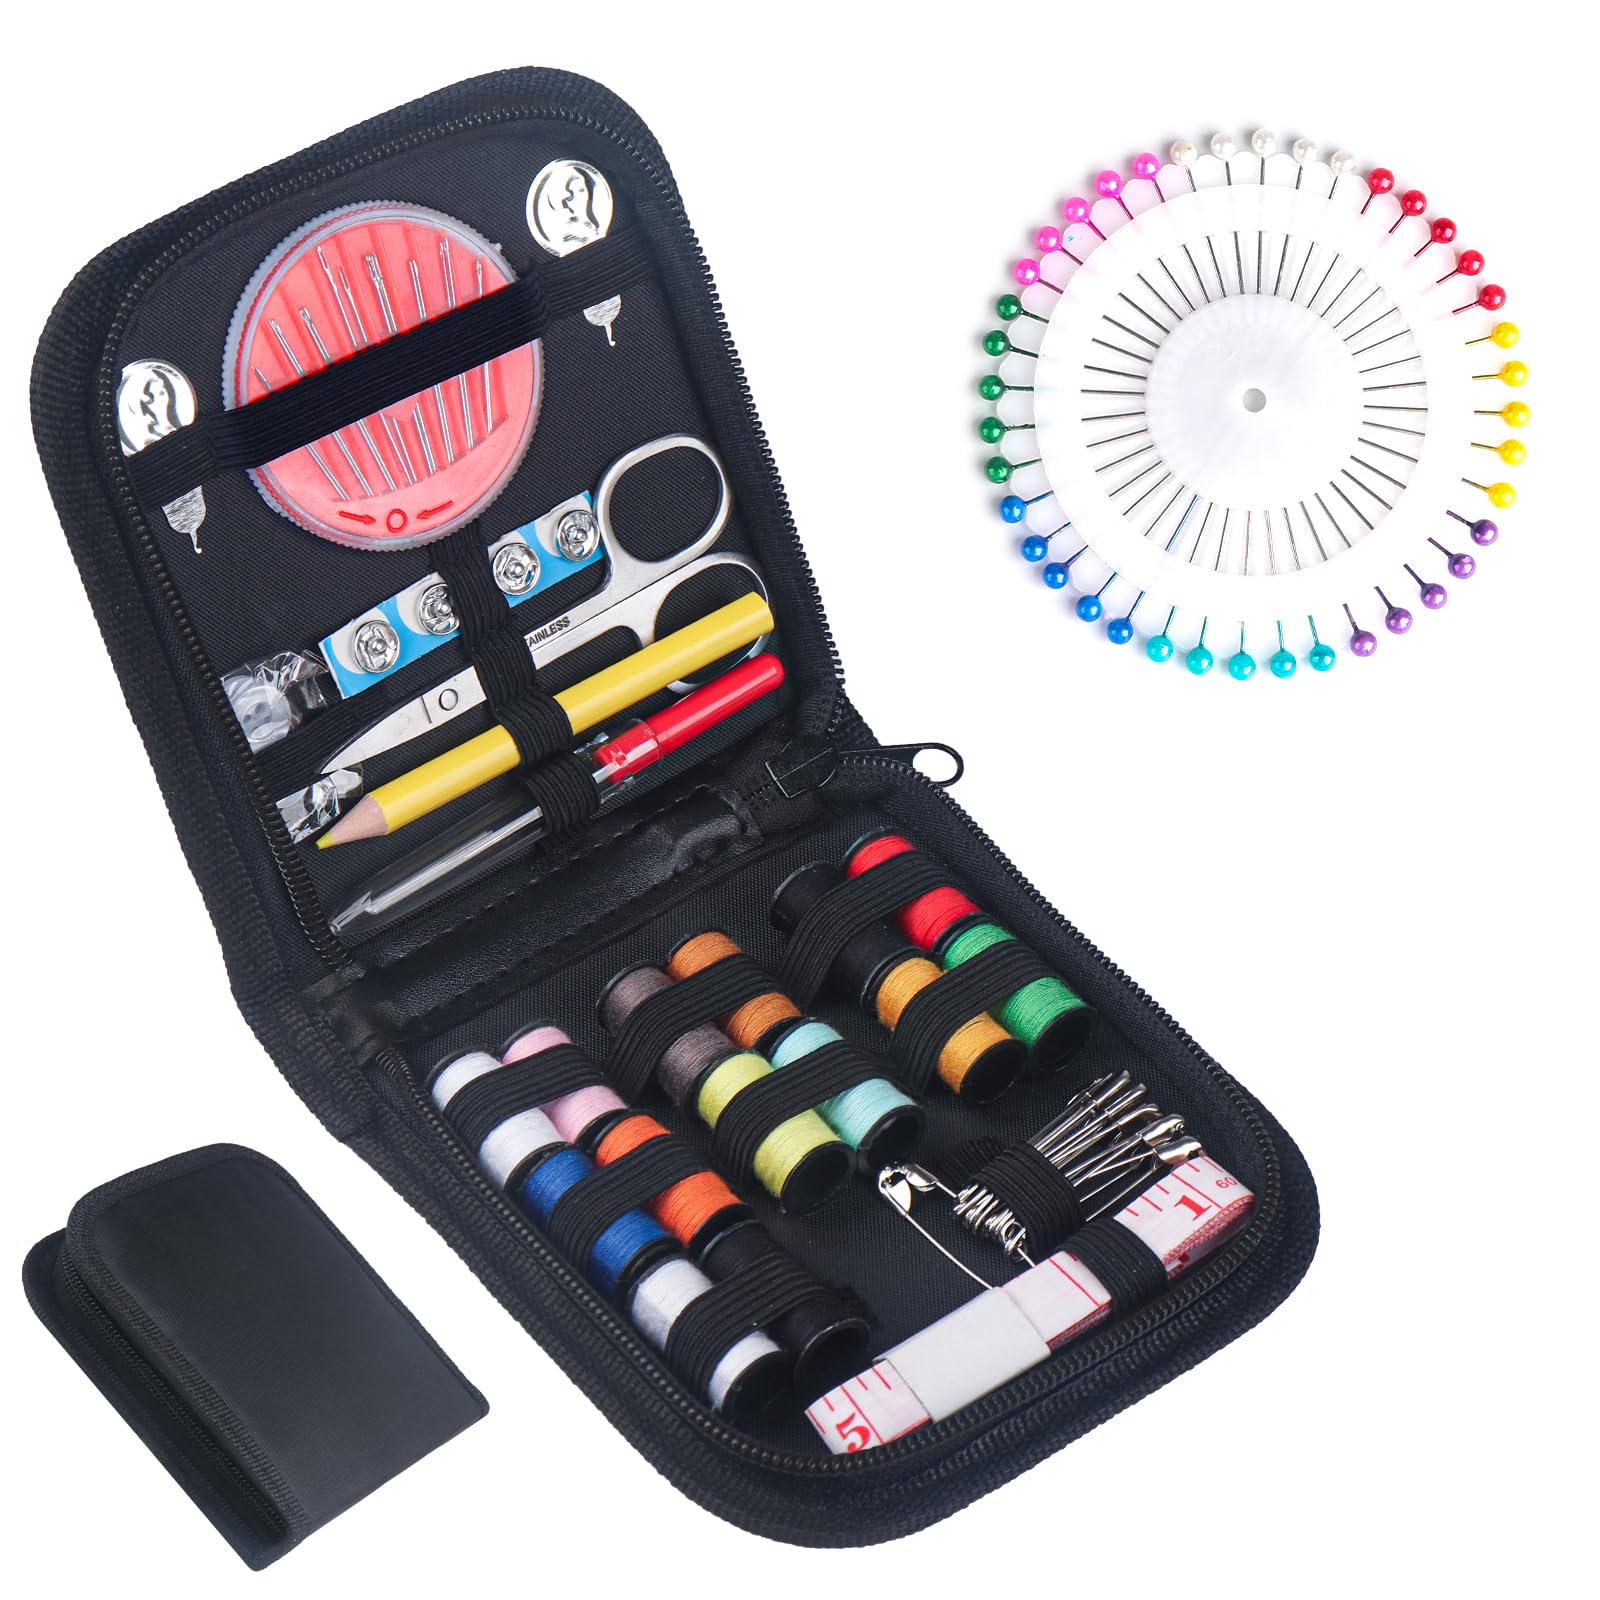 JANREAY Sewing Kit with 94 Sewing Accessories, Sewing Kit Travel Sewing Accessories for Beginners, Yarn Rolls, Sewing Needles, Yarn, Thimble, Tape Measure etc